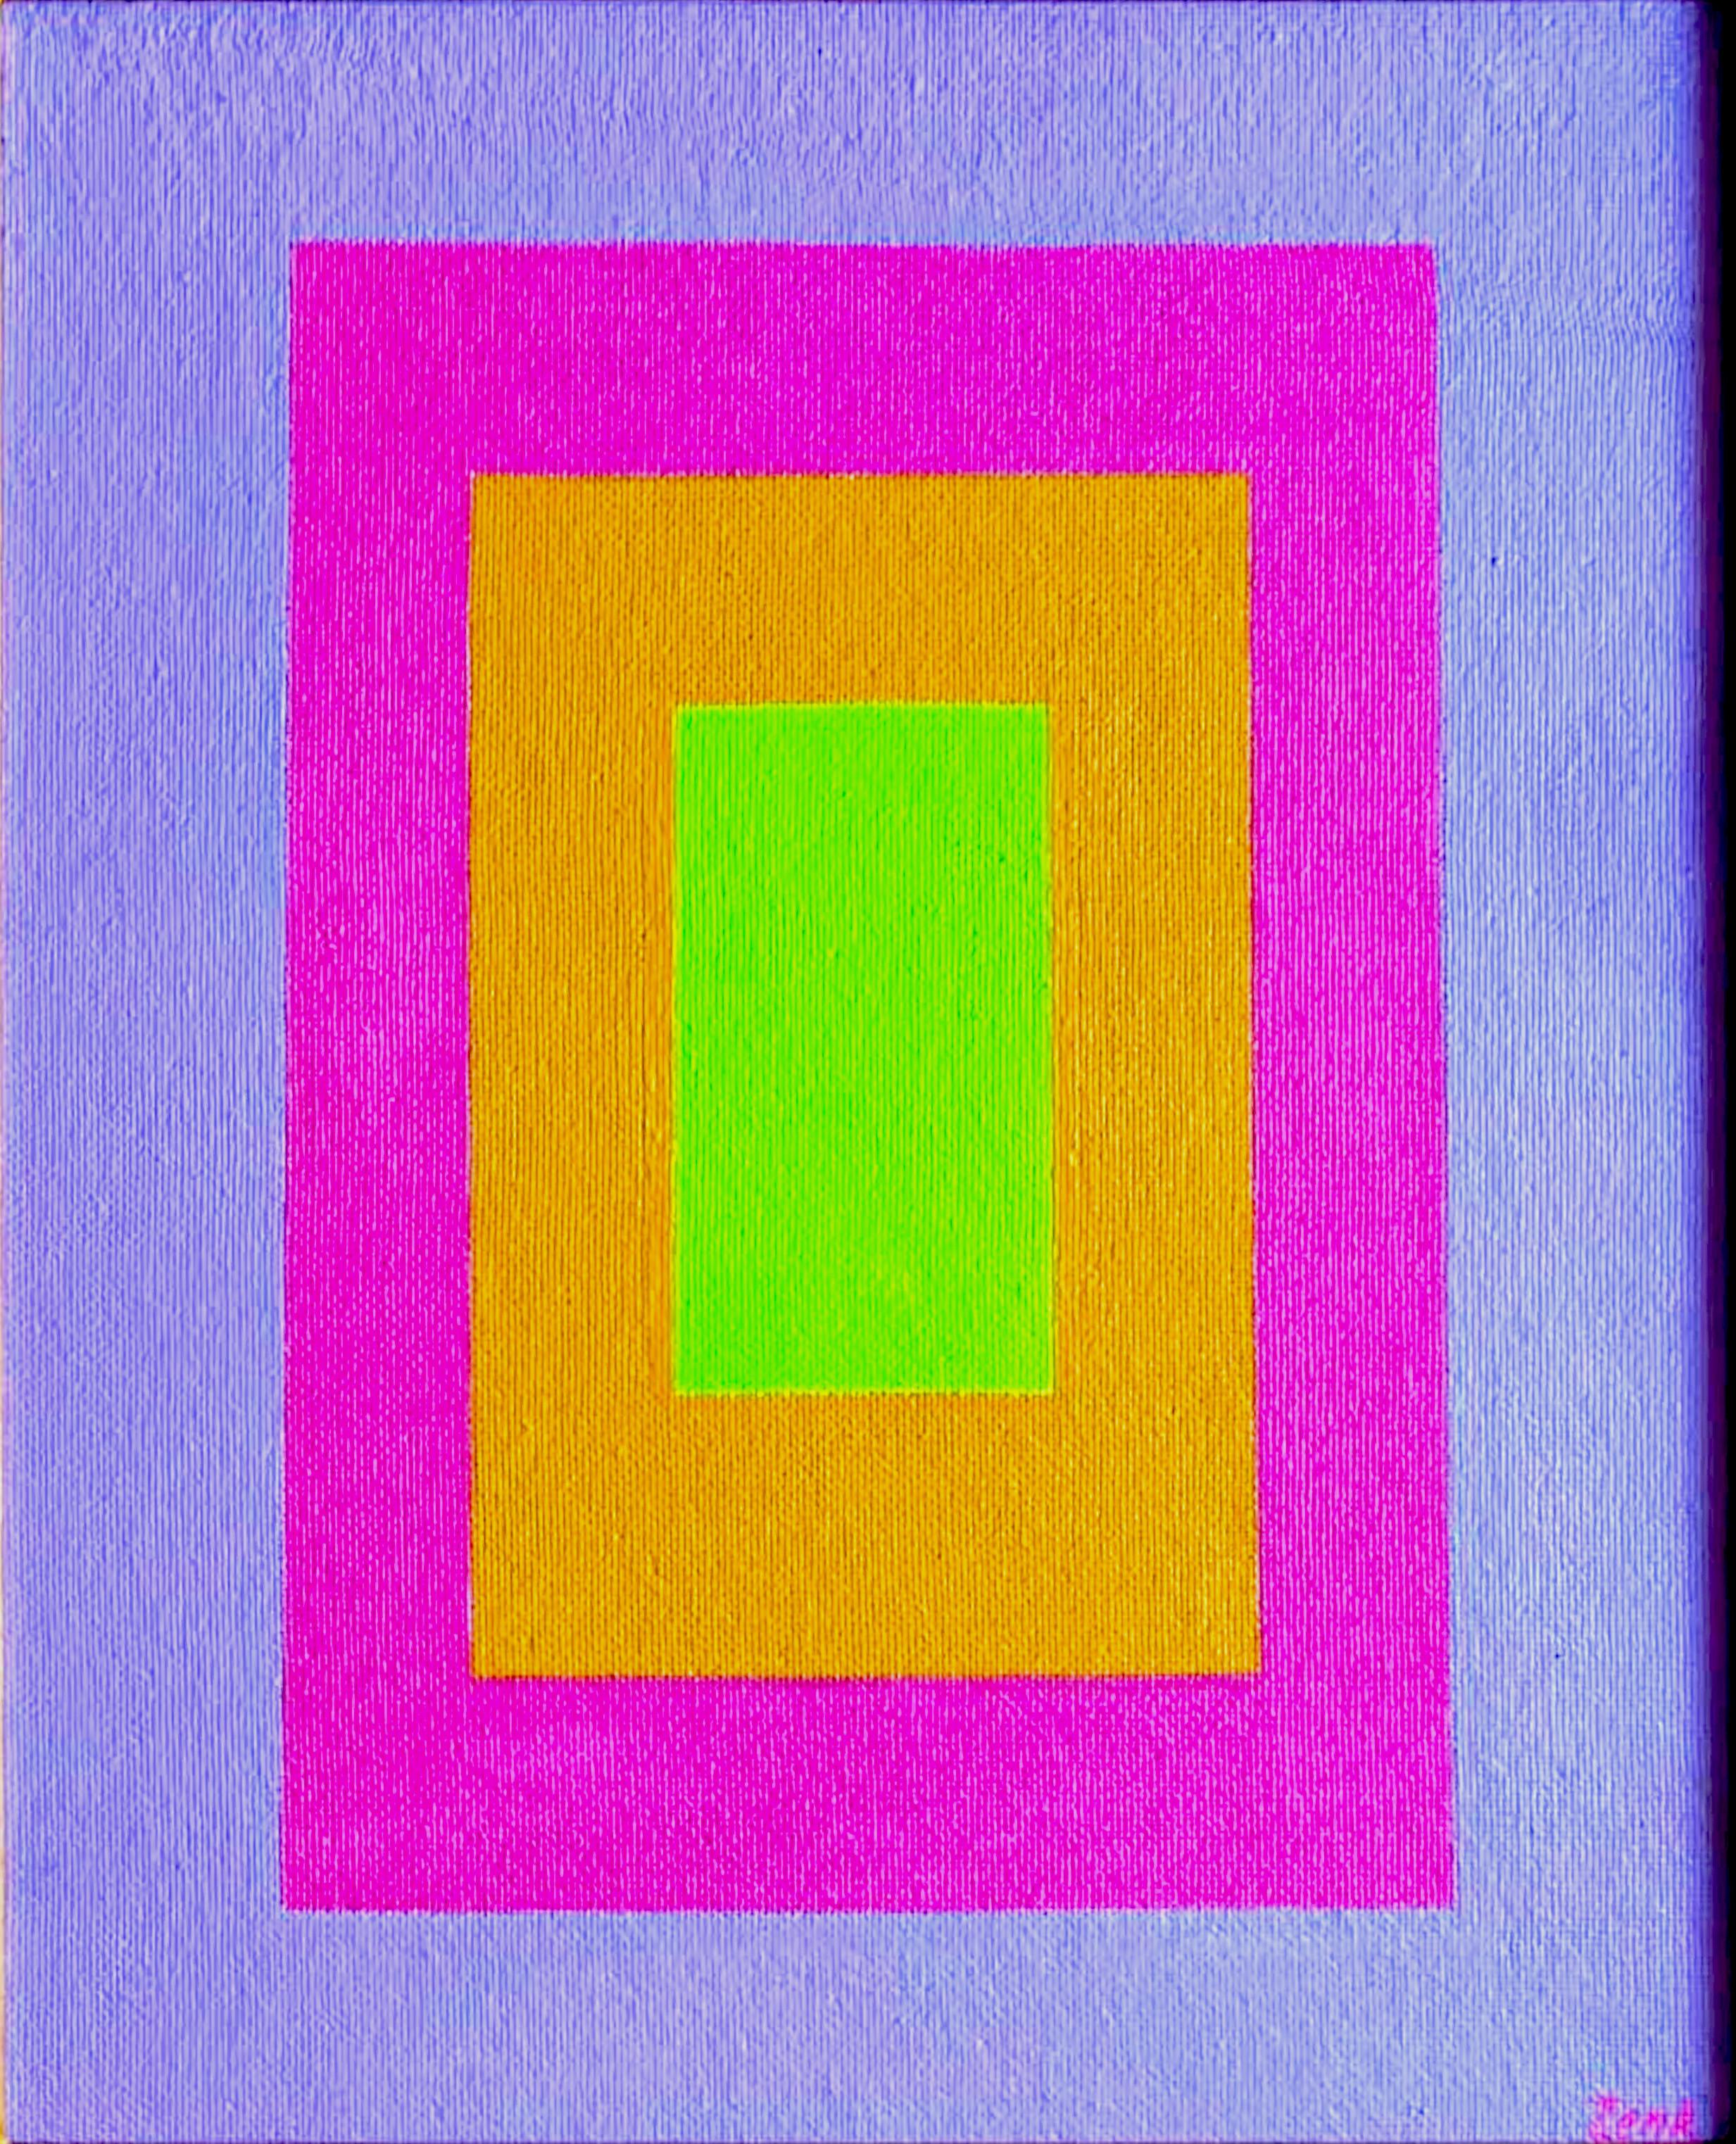 Unique painting Concentric Squares (Mid Century Modern Geometric Abstraction)  - Painting by Josef Zenk